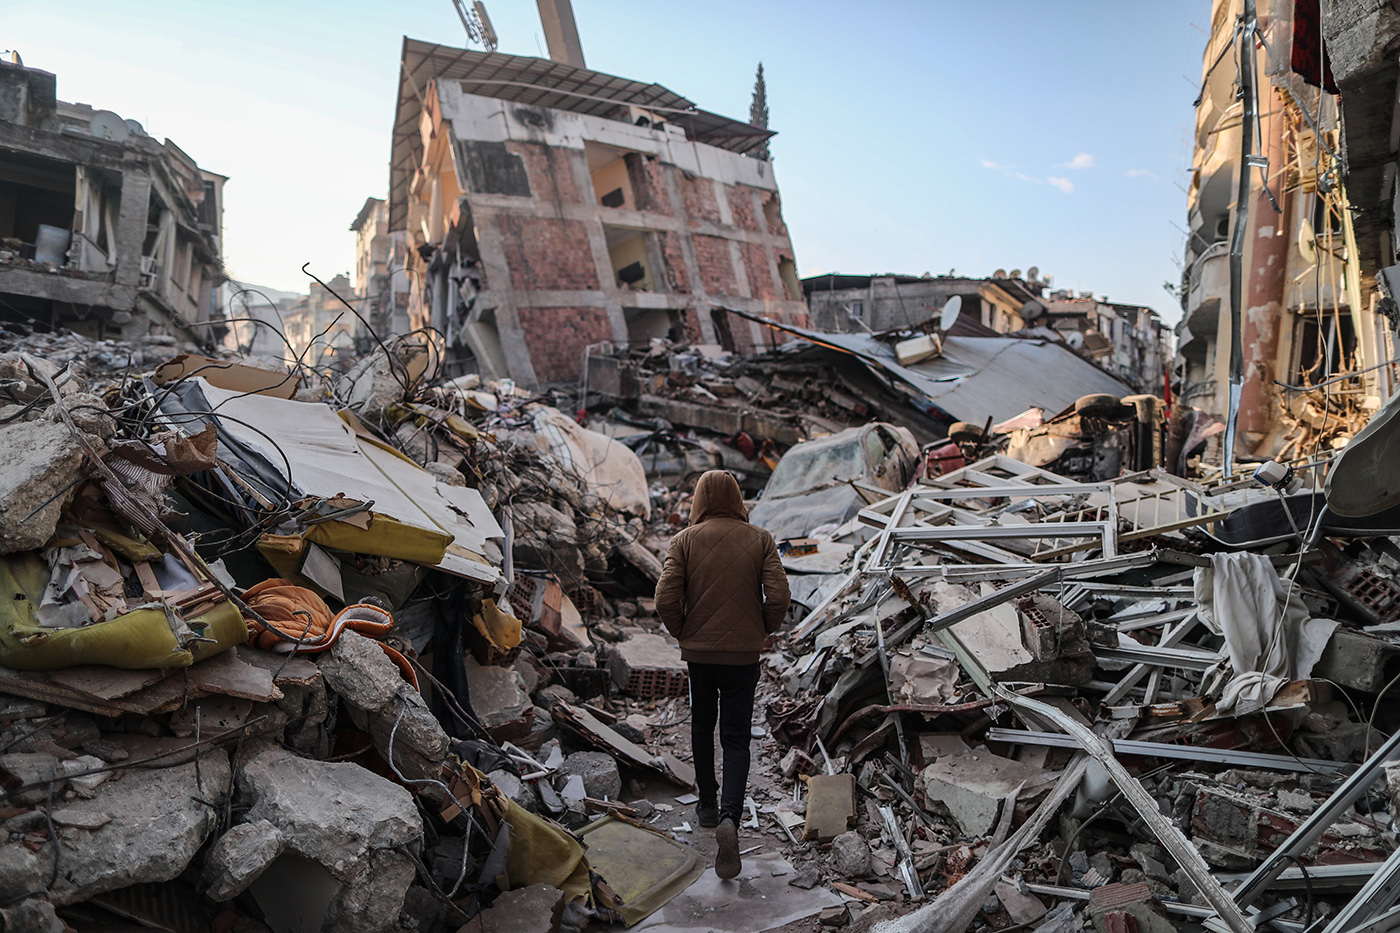  man walks next to collapsed buildings after a powerful earthquake in Hatay, Turkey, 11 February 2023. More than 24,000 people have died and thousands more are injured after two major earthquakes struck southern Turkey and northern Syria on 06 February. Authorities fear the death toll will keep climbing as rescuers look for survivors across the region.